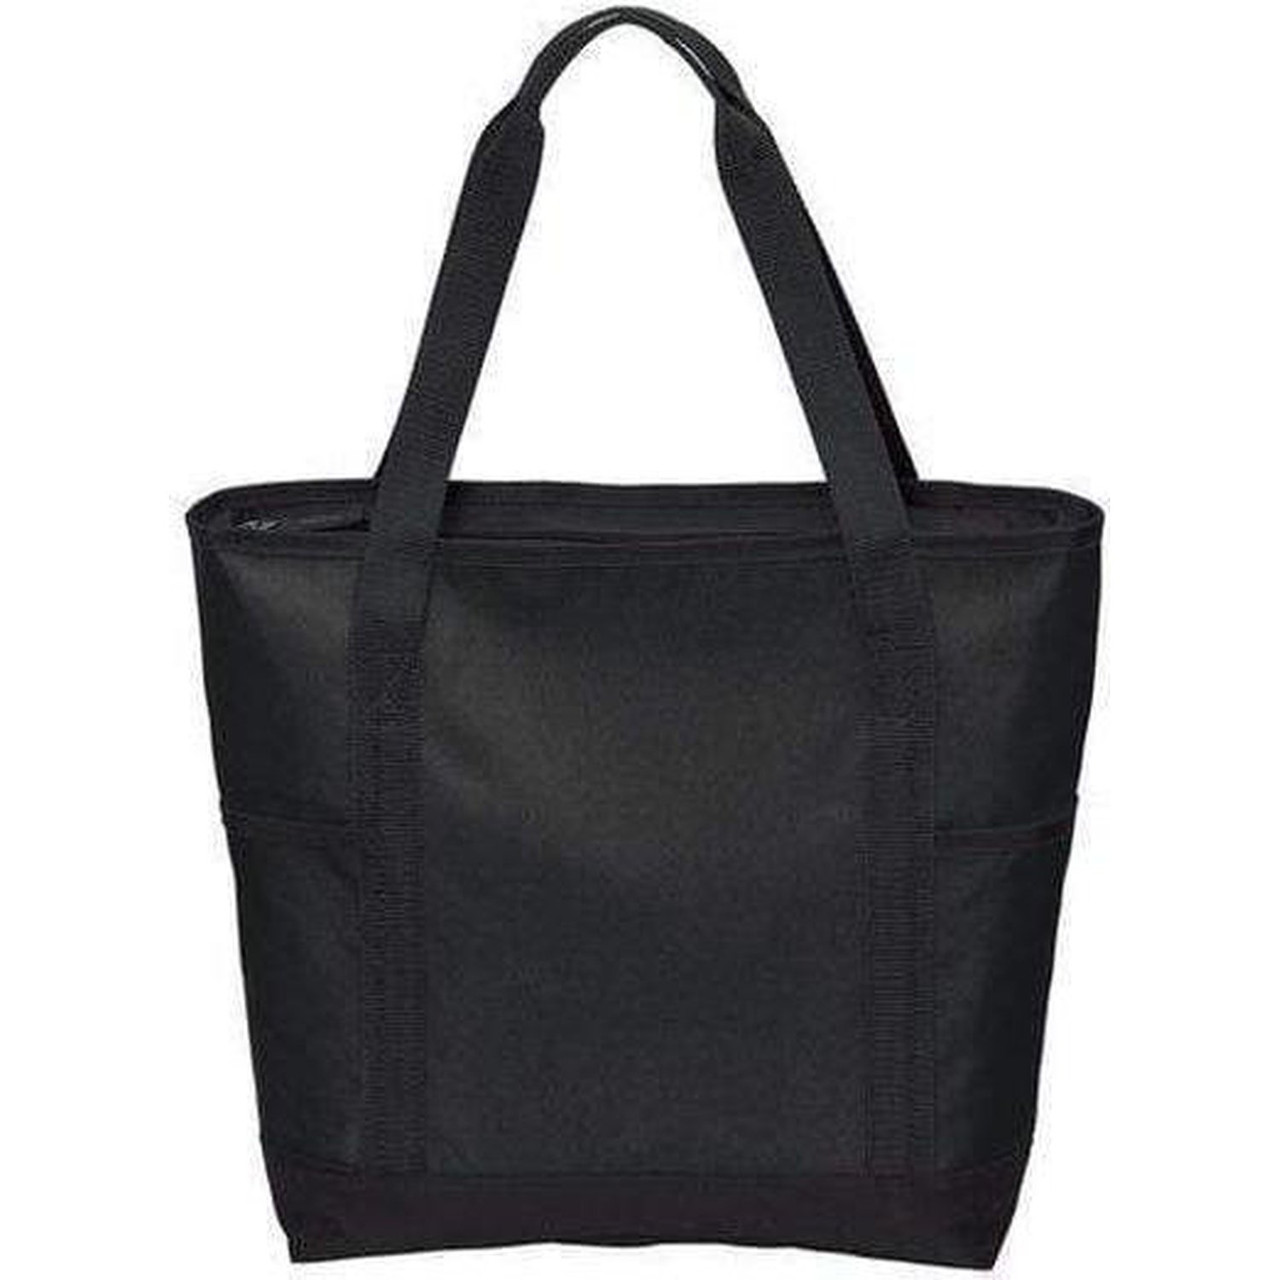 Polyester Canvas On-The-Go Tote Bag with Zippered Top - BG411